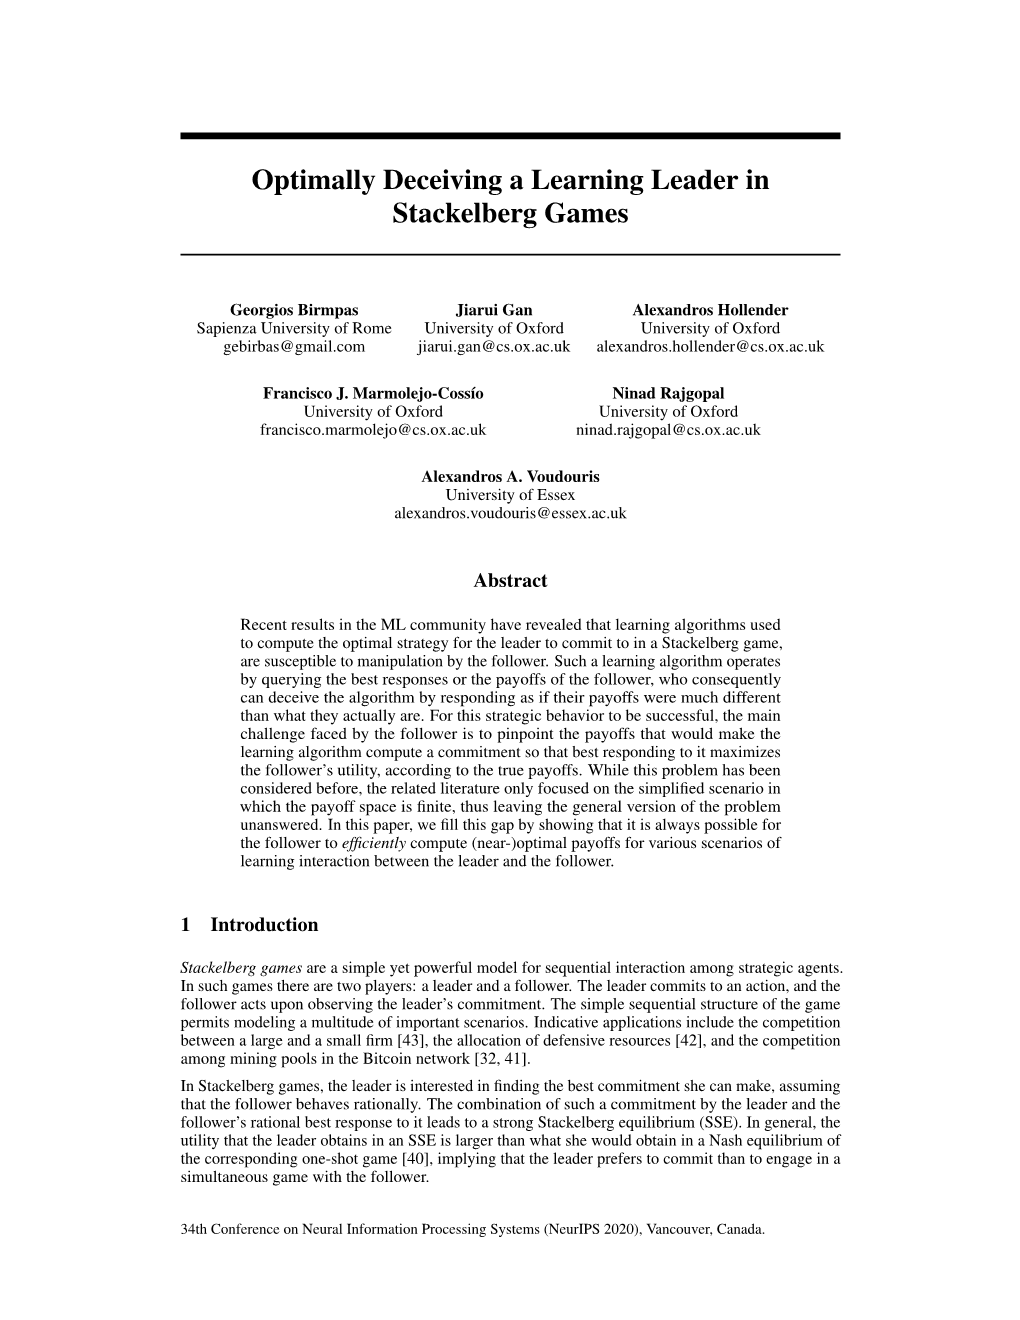 Optimally Deceiving a Learning Leader in Stackelberg Games